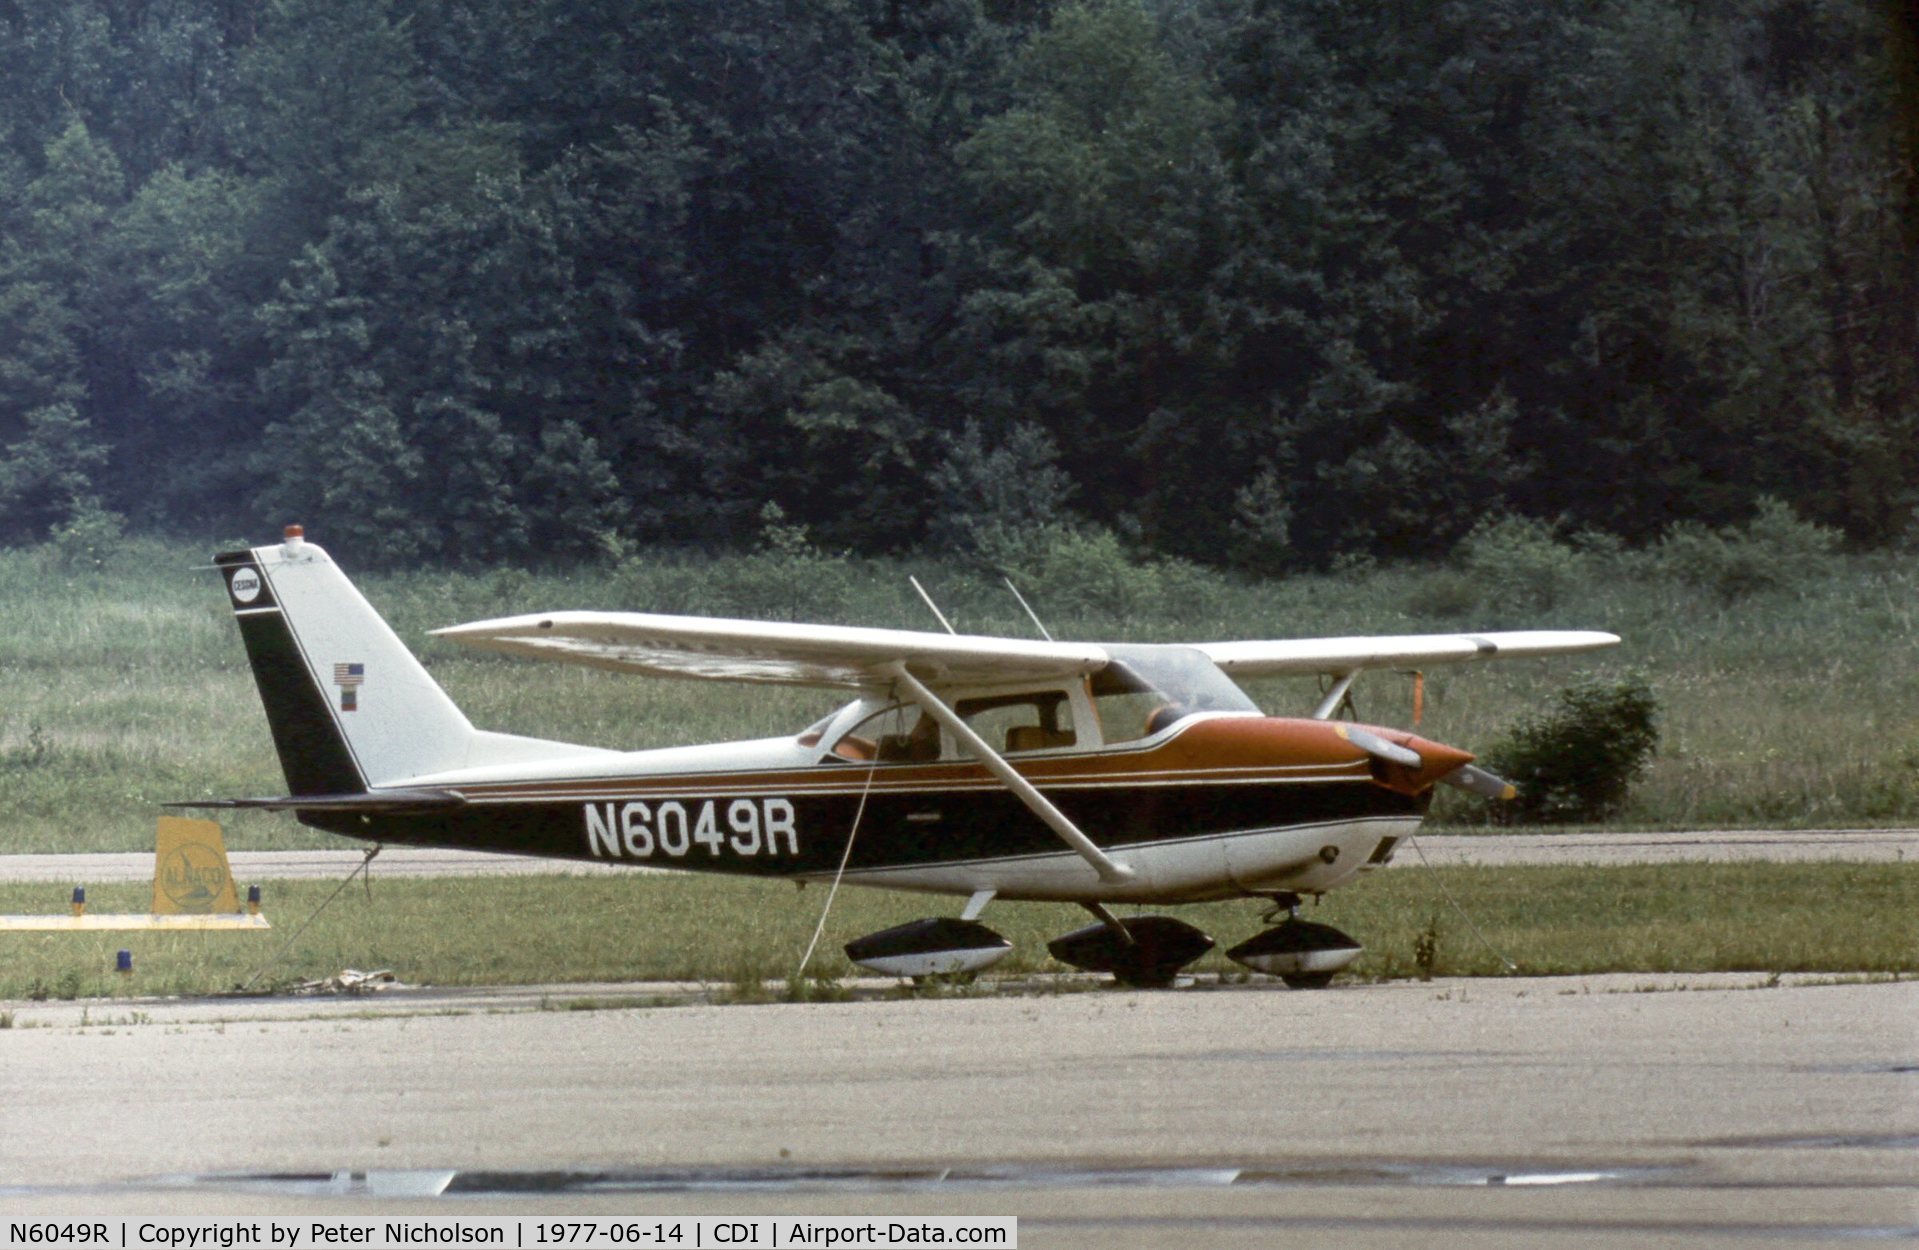 N6049R, 1965 Cessna 172G C/N 17253718, This Skyhawk was seen at Cambridge in the Summer of 1977.